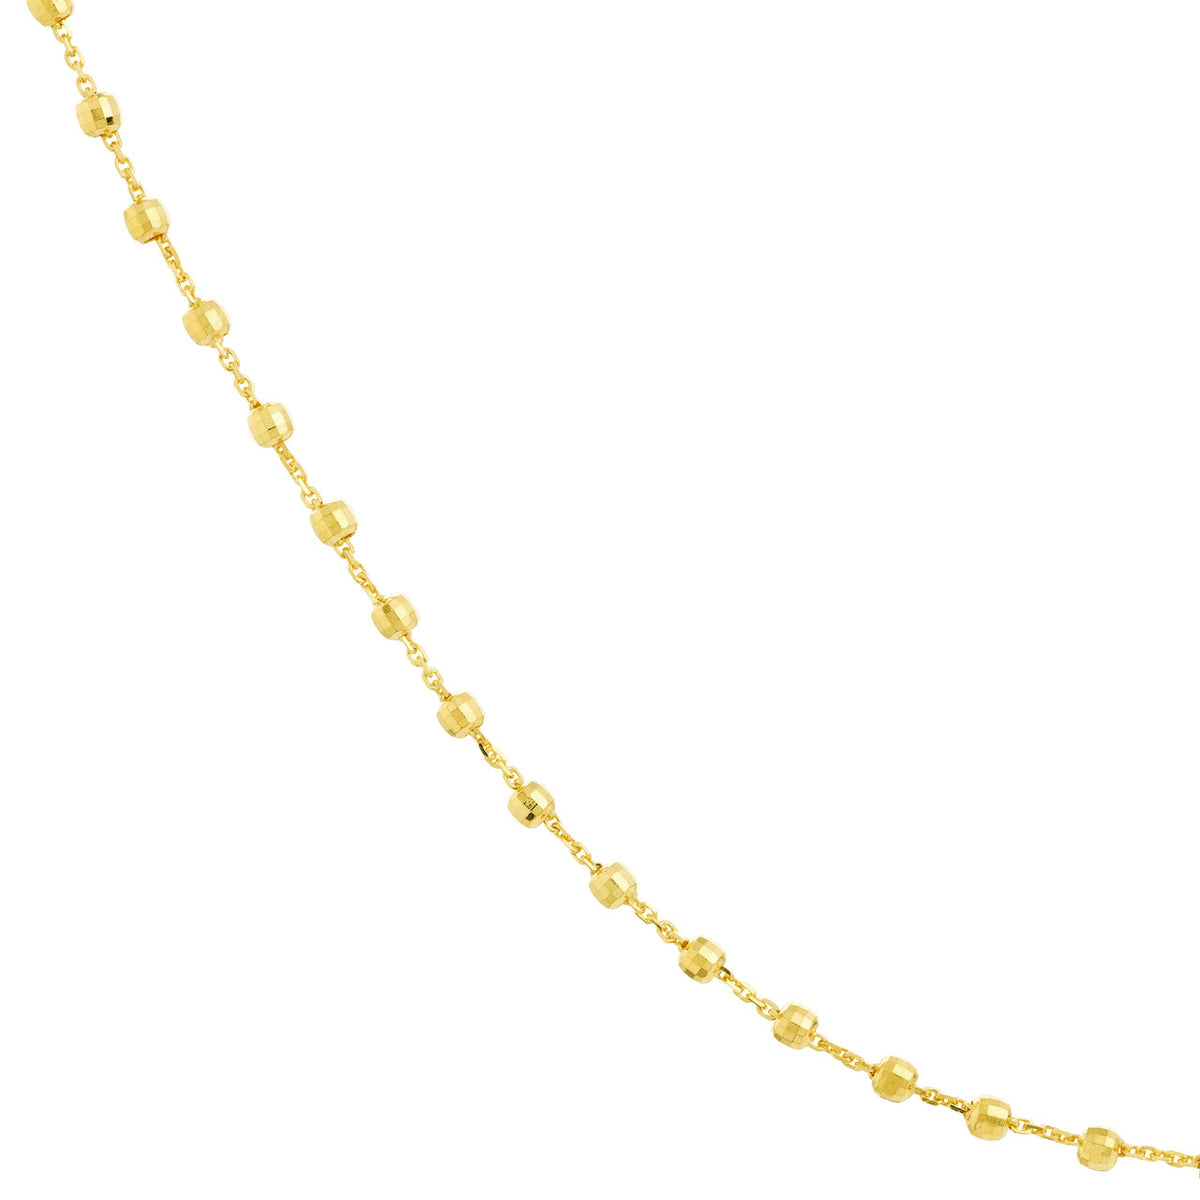 14K Yellow Gold Cable Chain Necklaces with 2.5mm D/C Bead Stations